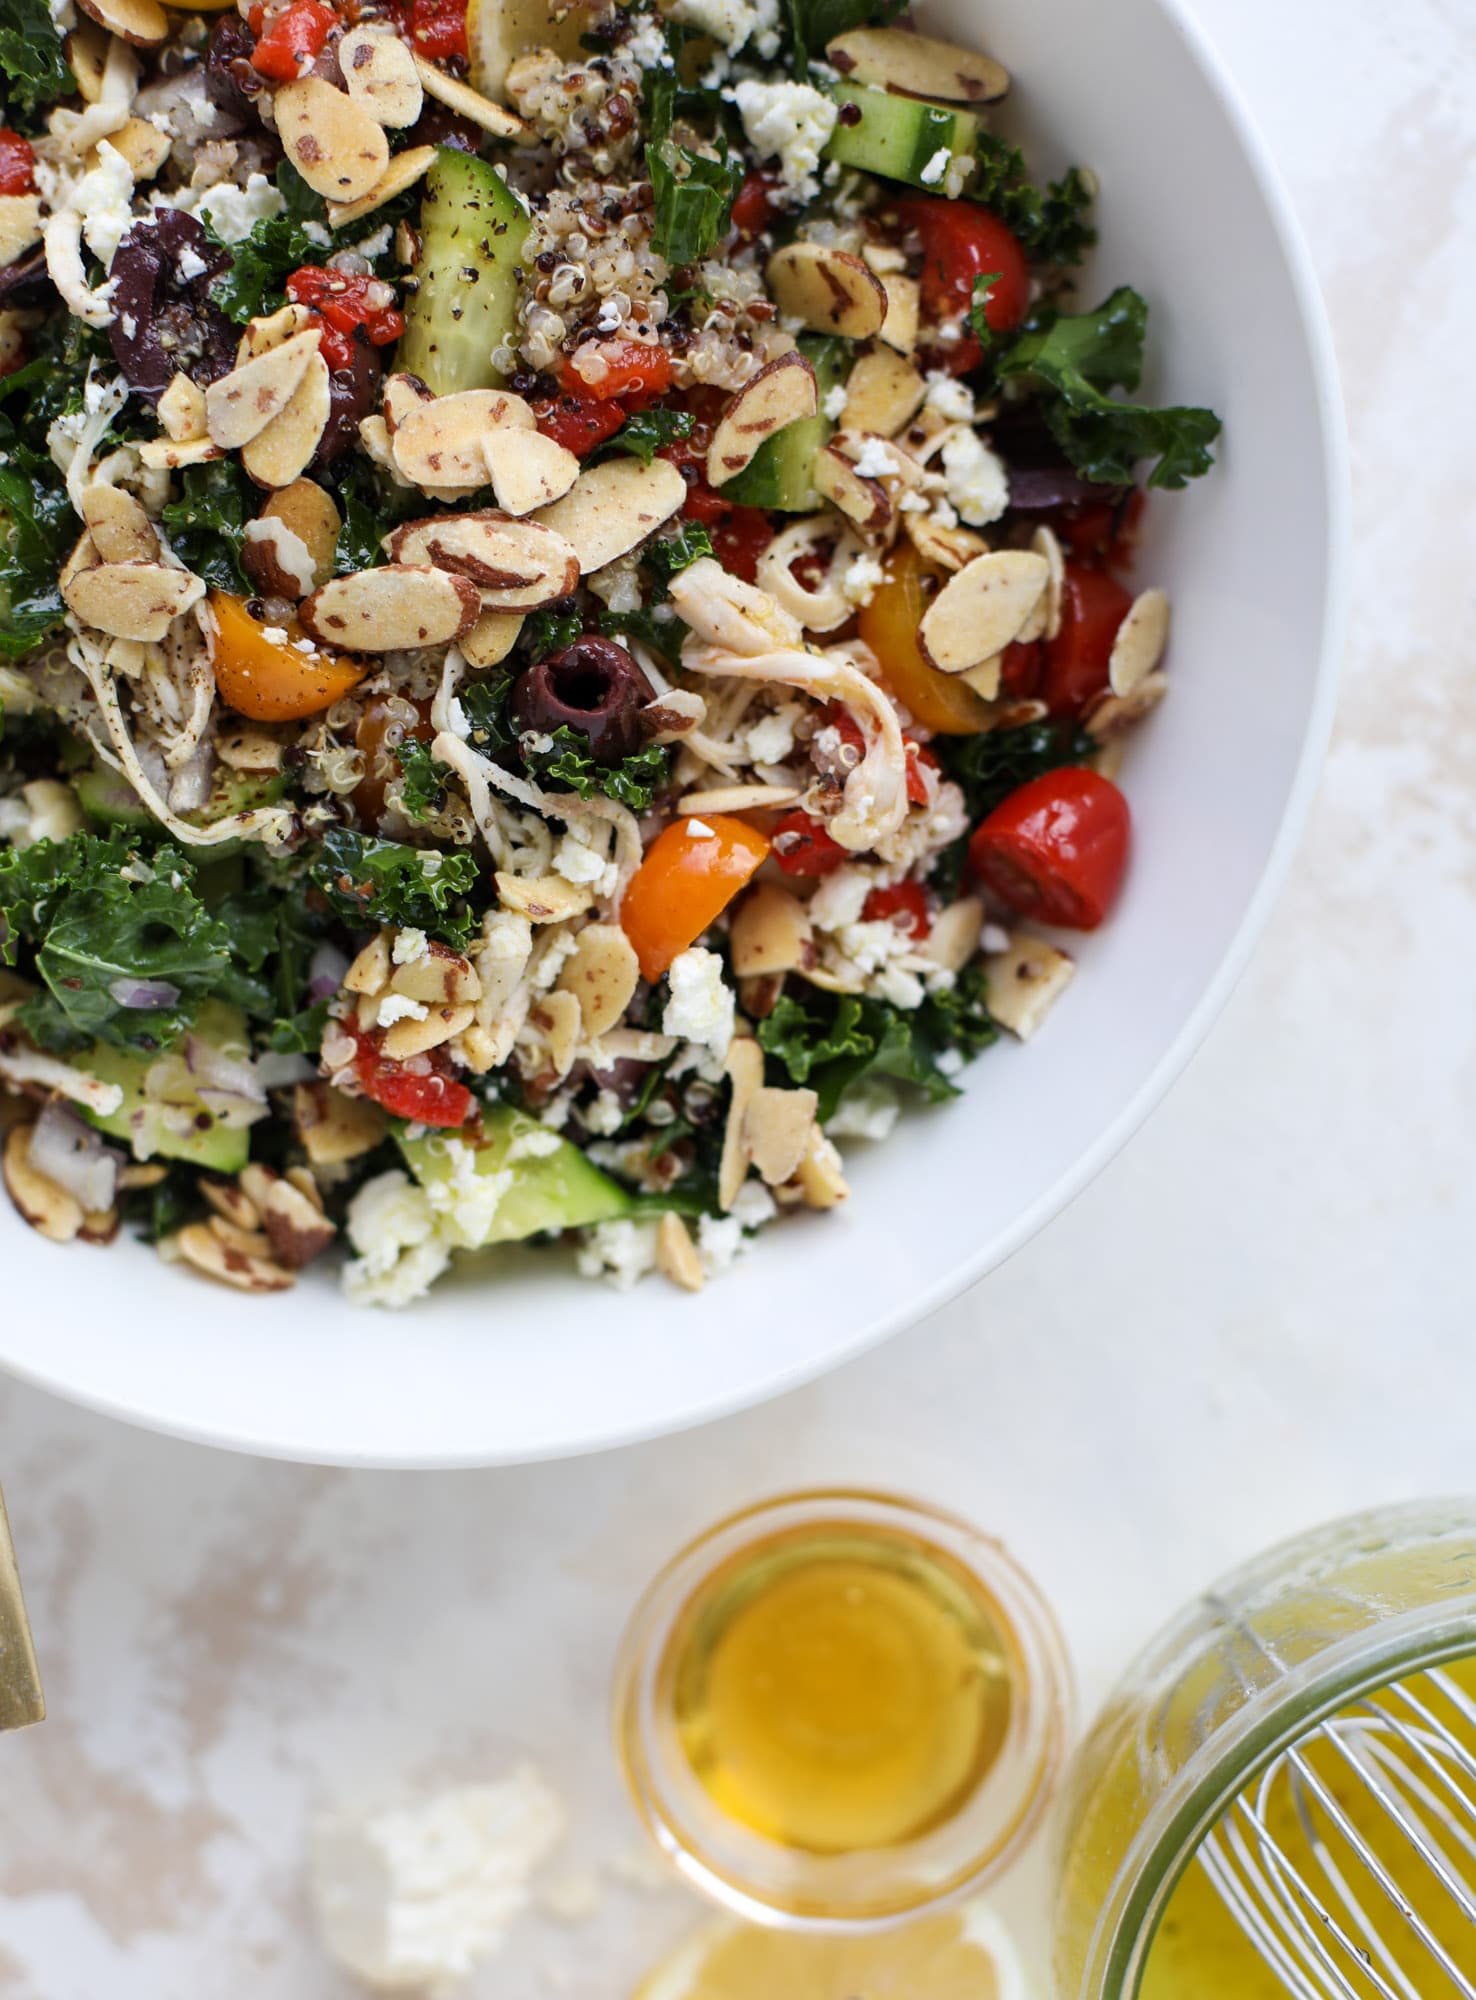 This mediterranean kale and quinoa salad is a copycat for the delicious Panera Bread Modern Greek Salad with Chicken. Super easy and satisfying! I howsweeteats.com #mediterranean #kalesalad